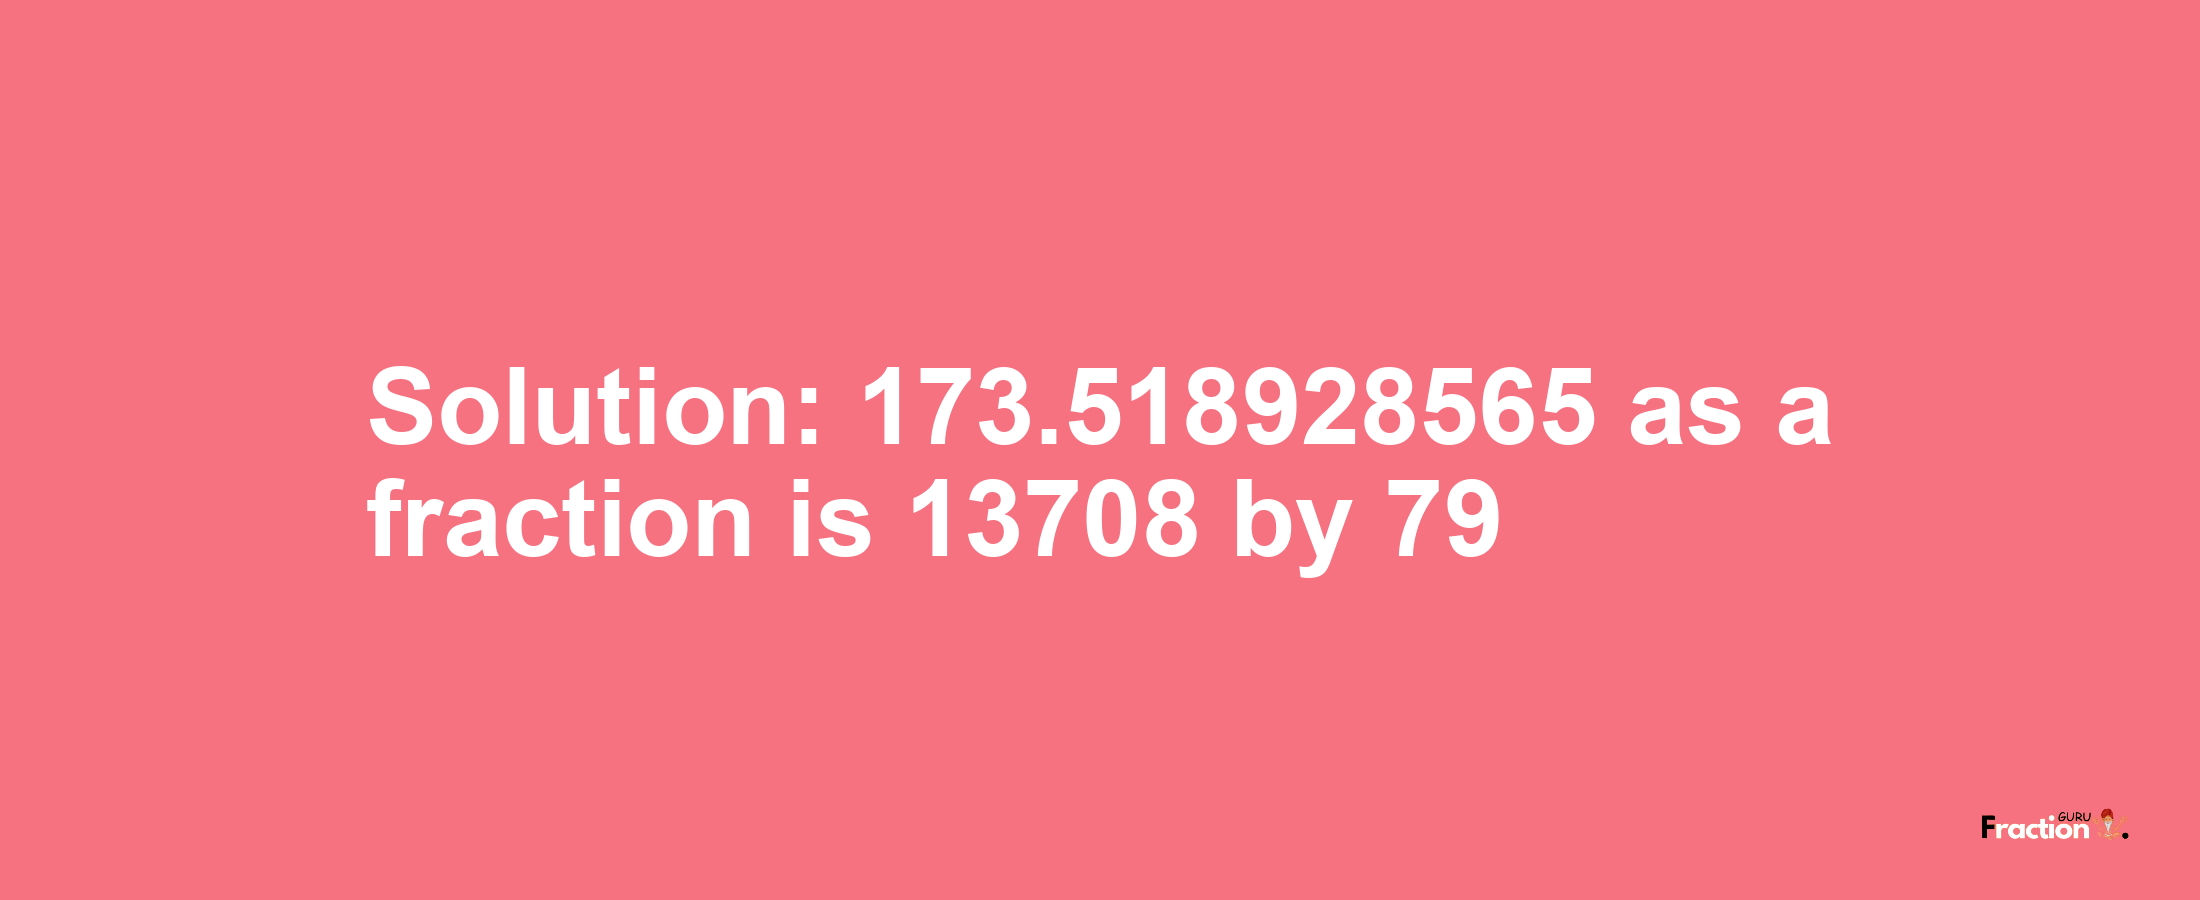 Solution:173.518928565 as a fraction is 13708/79